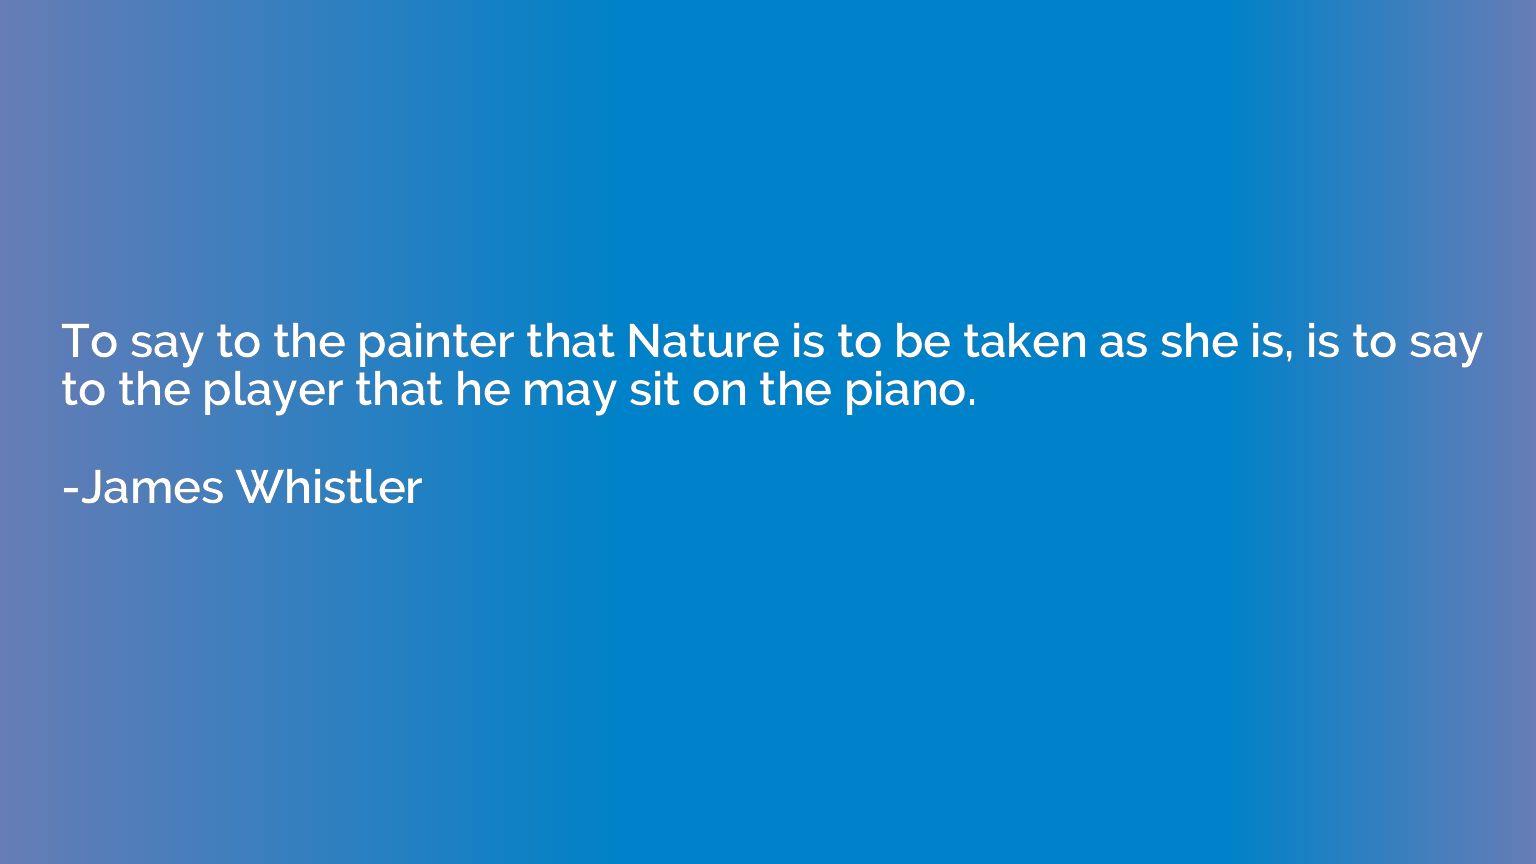 To say to the painter that Nature is to be taken as she is, 